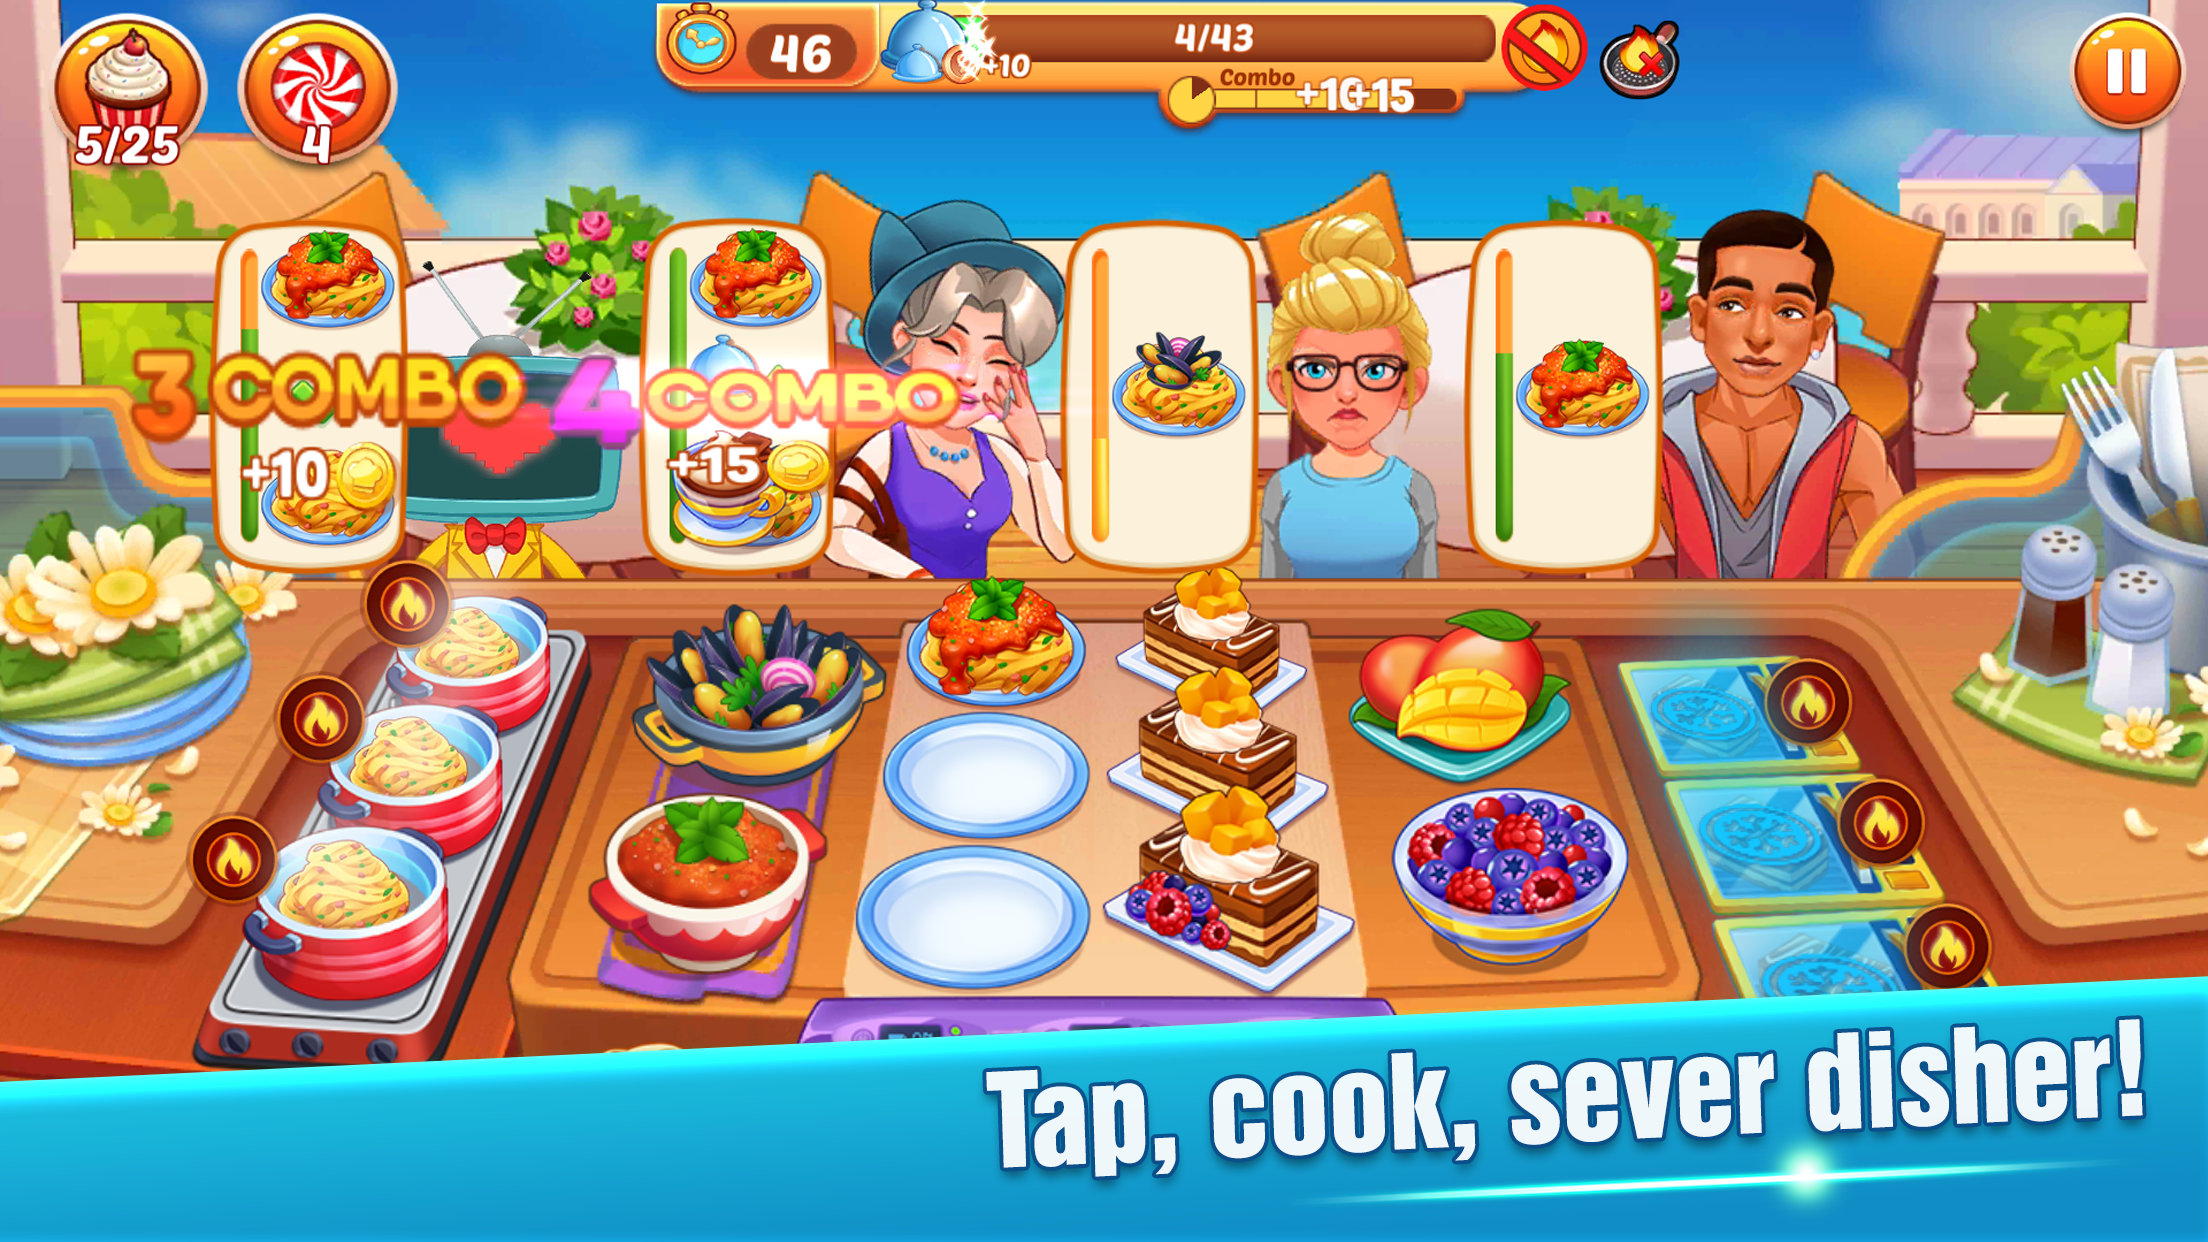 Screenshot 1 of Cooking Master :Fever Chef Restaurant Cooking Game 1.73.113